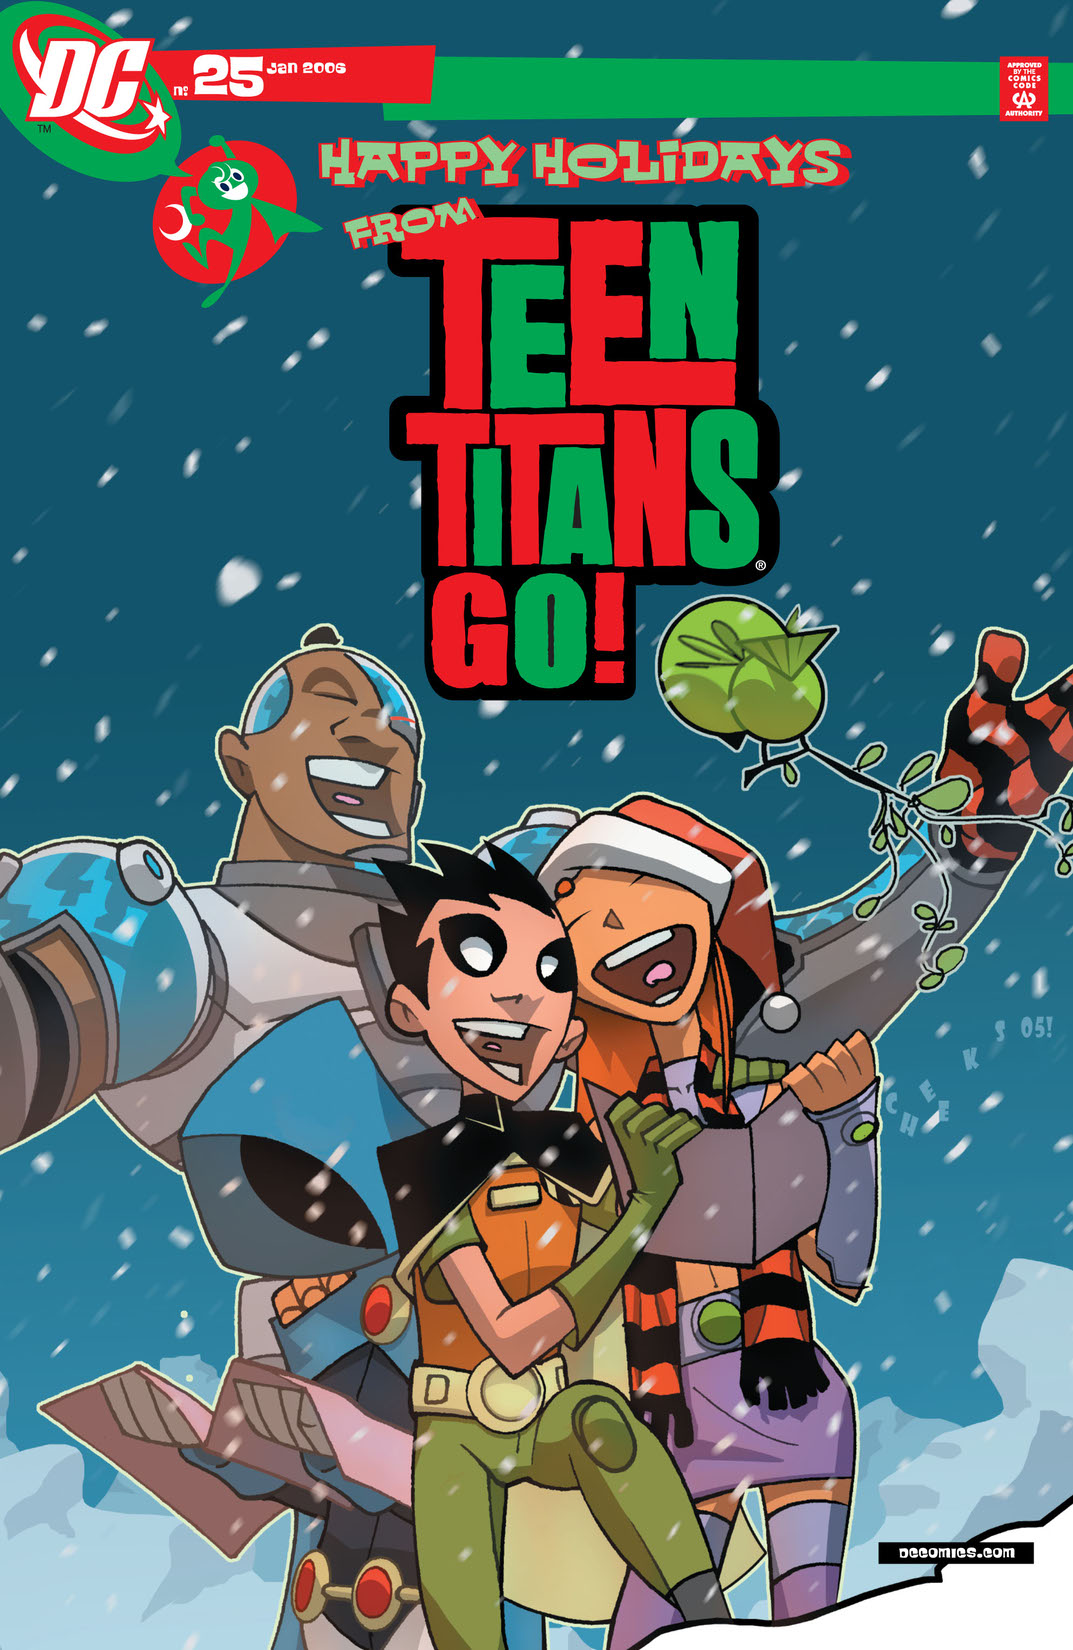 Teen Titans Go! (2003-) #25 preview images